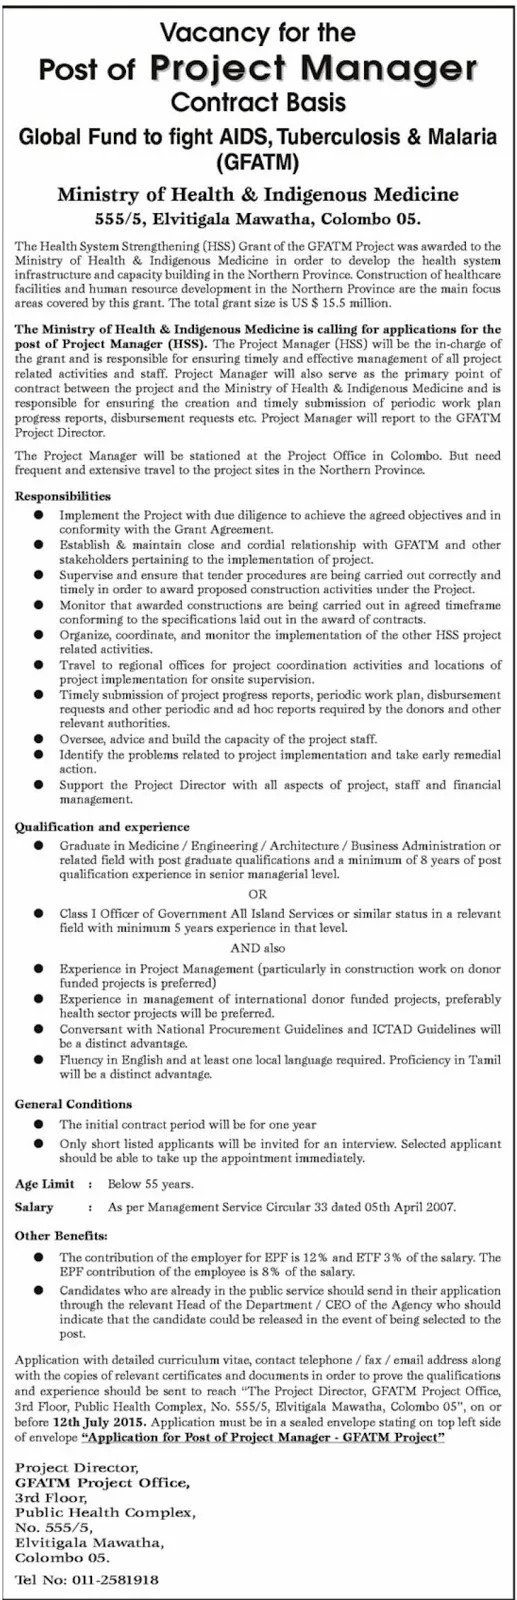 Project Manager Vacancy in Ministry of Health & Indigenous Medicine